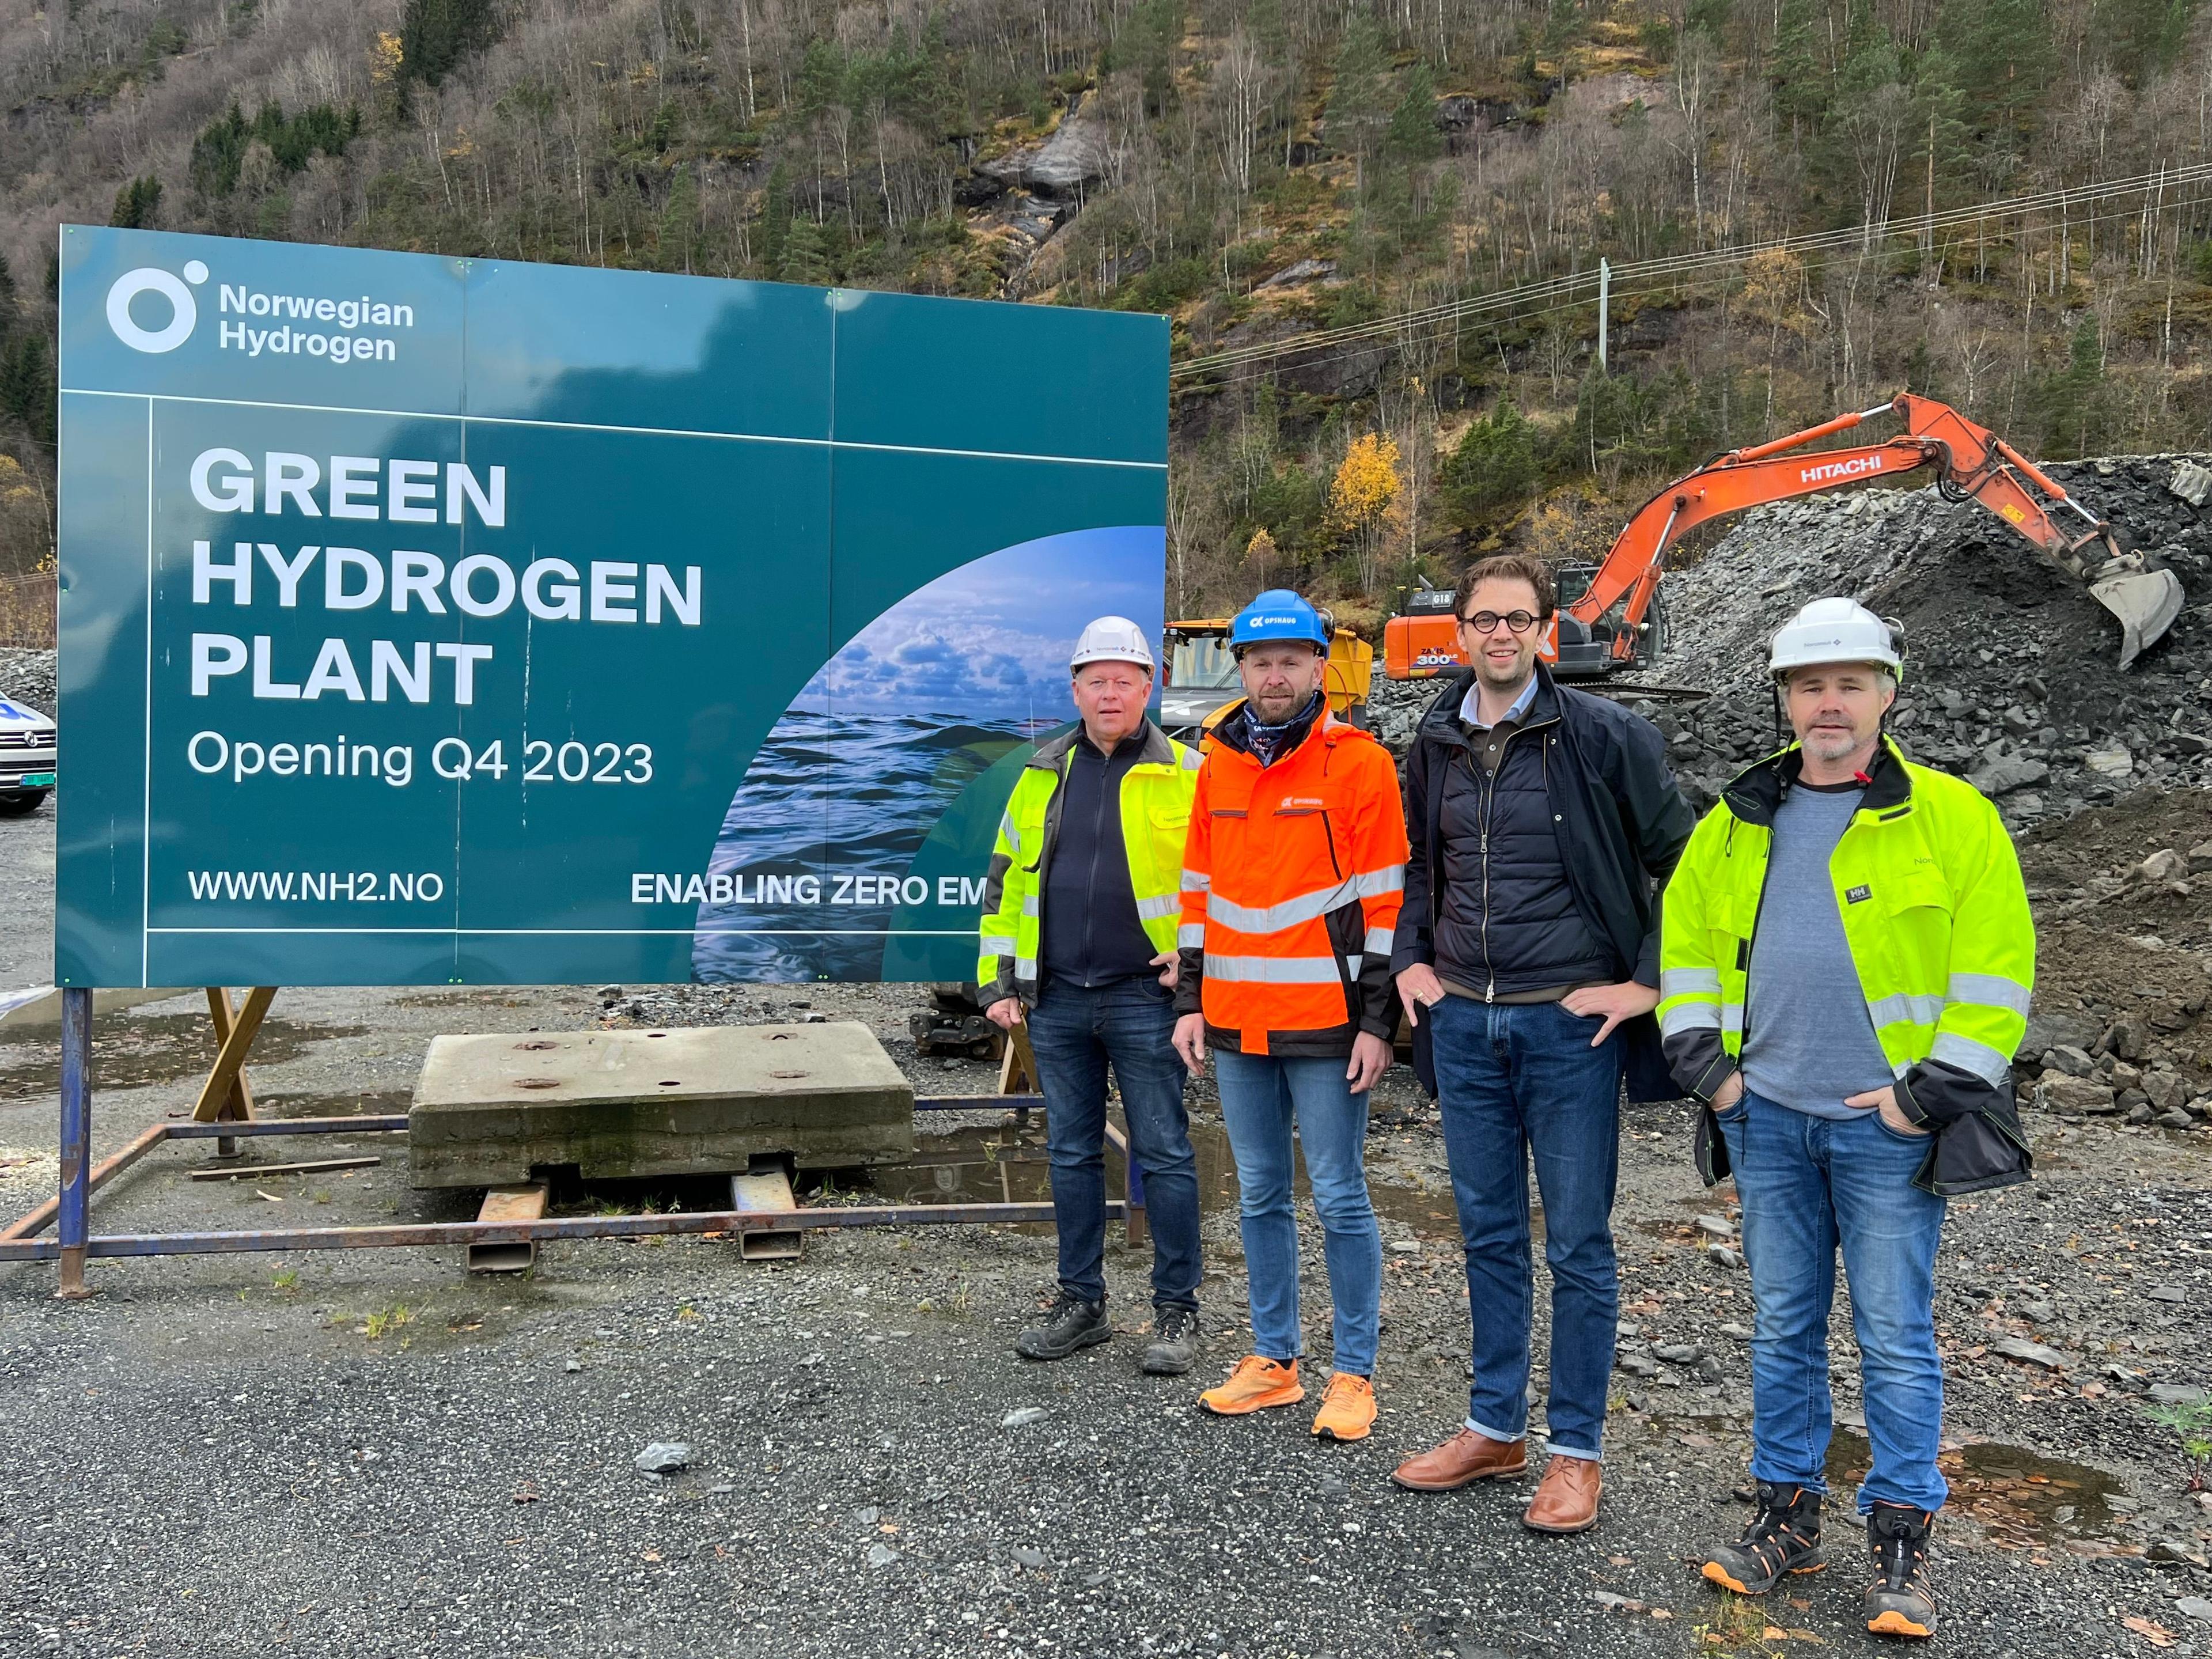 Project Manager Andreas Wenaas Østigård together with representatives from Opshaug, performing the ground work.